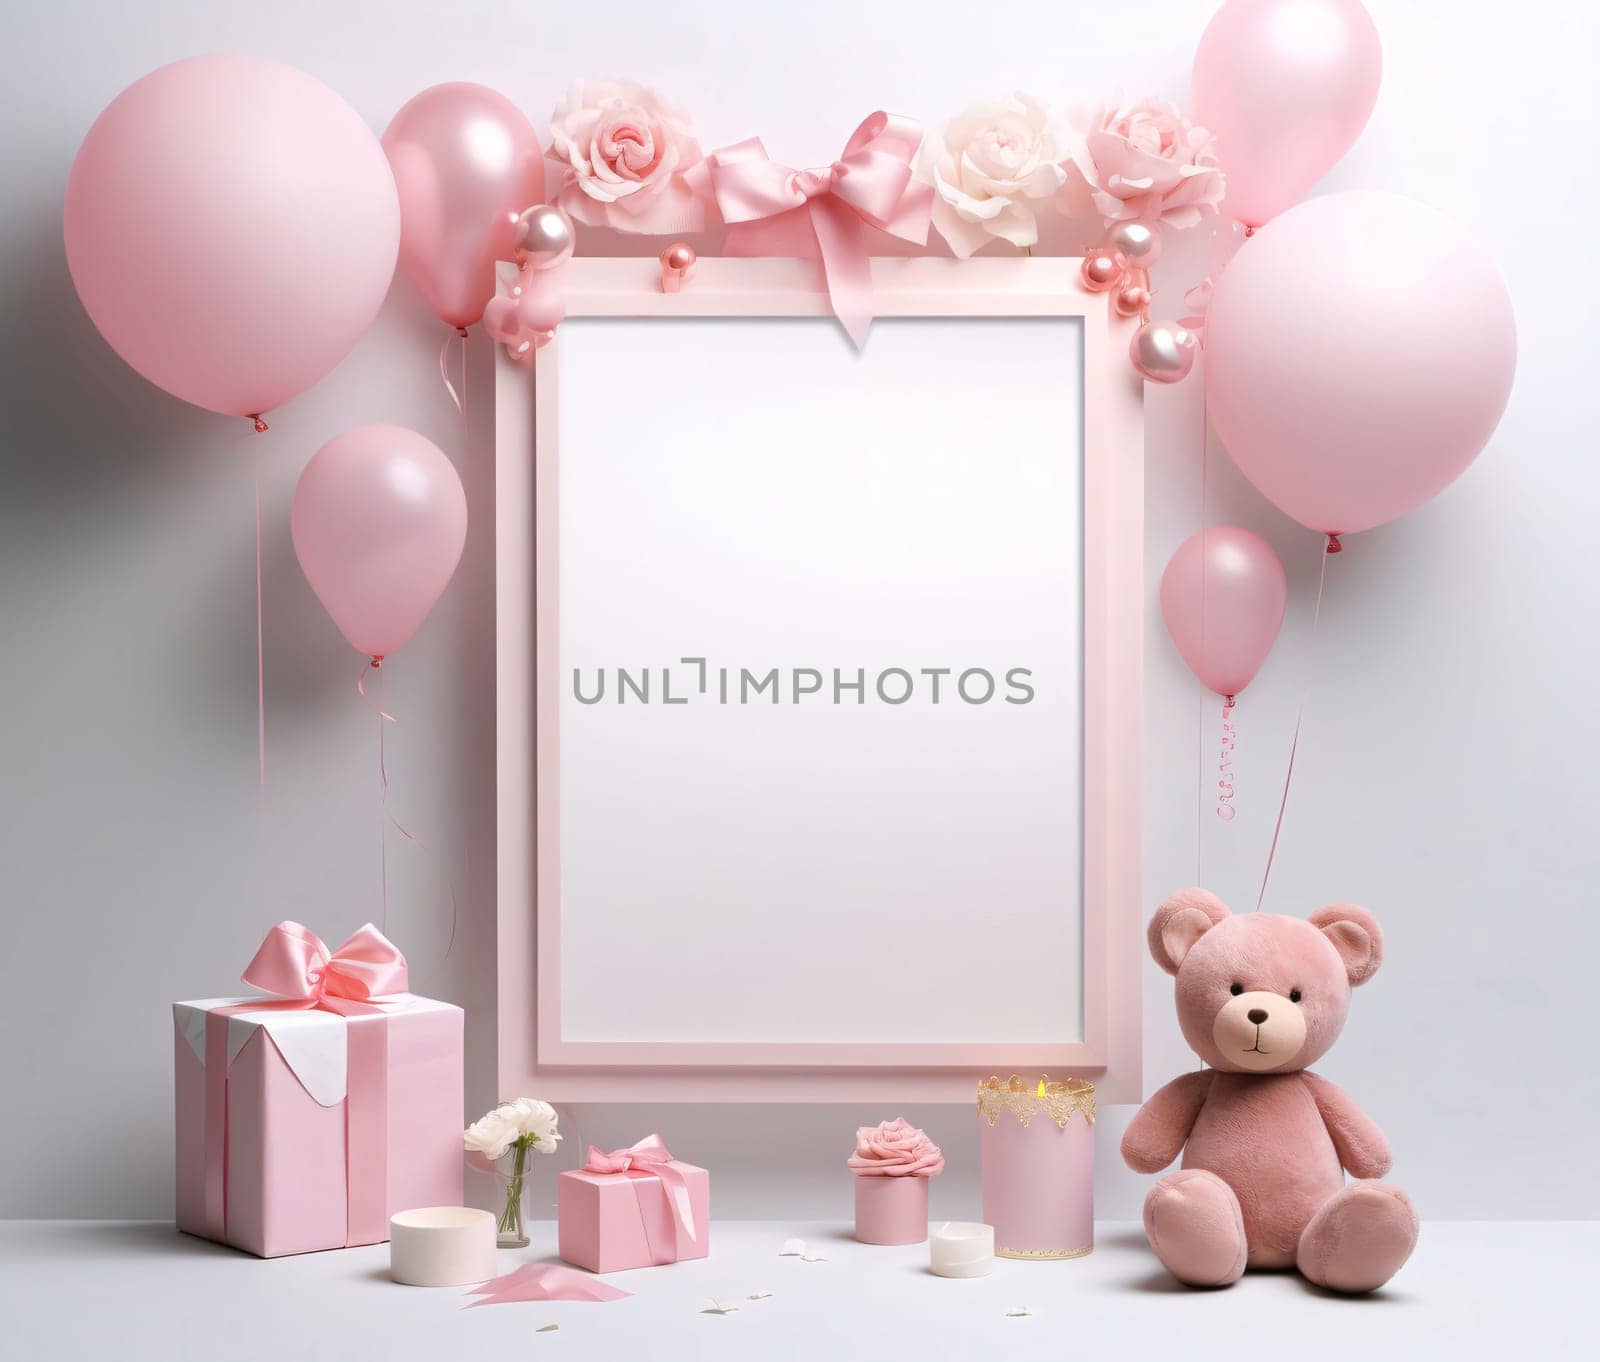 White blank card with space for your own content around teddy bear balloons, pink gifts. Gifts as a day symbol of present and love. A time of falling in love and love.